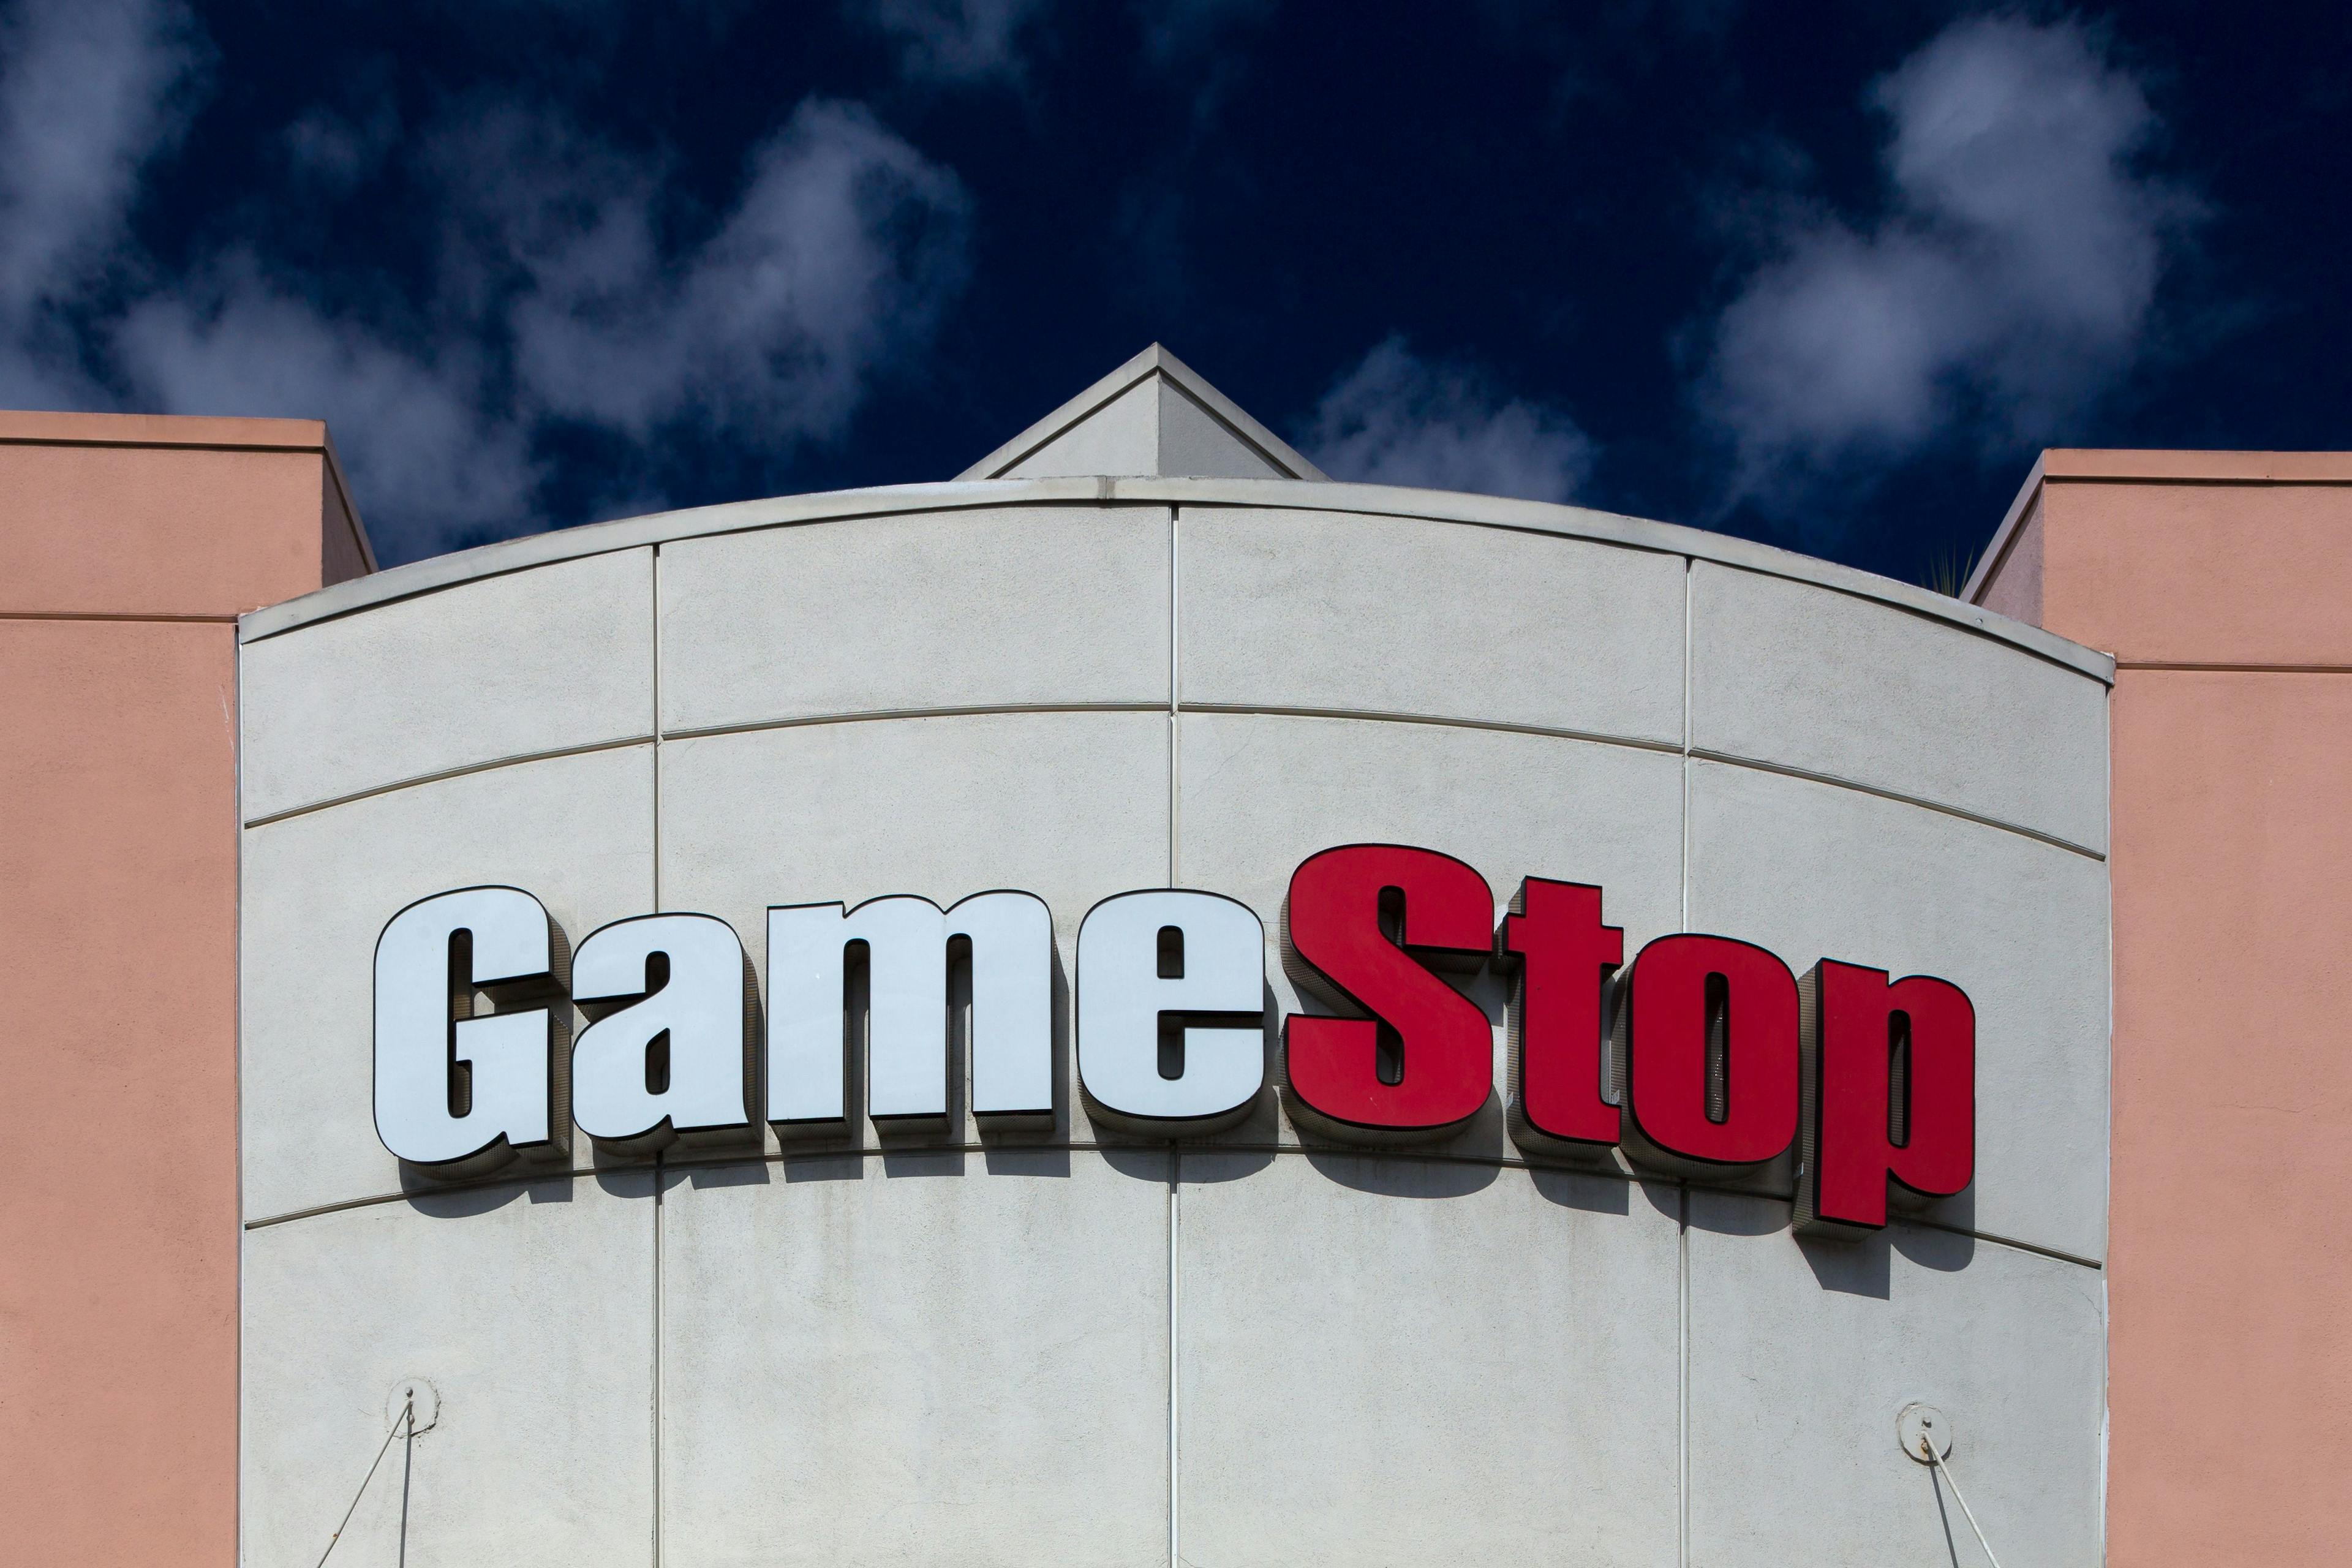 /gamestop-is-a-financial-protest-against-the-global-financial-system-1zv33t6 feature image